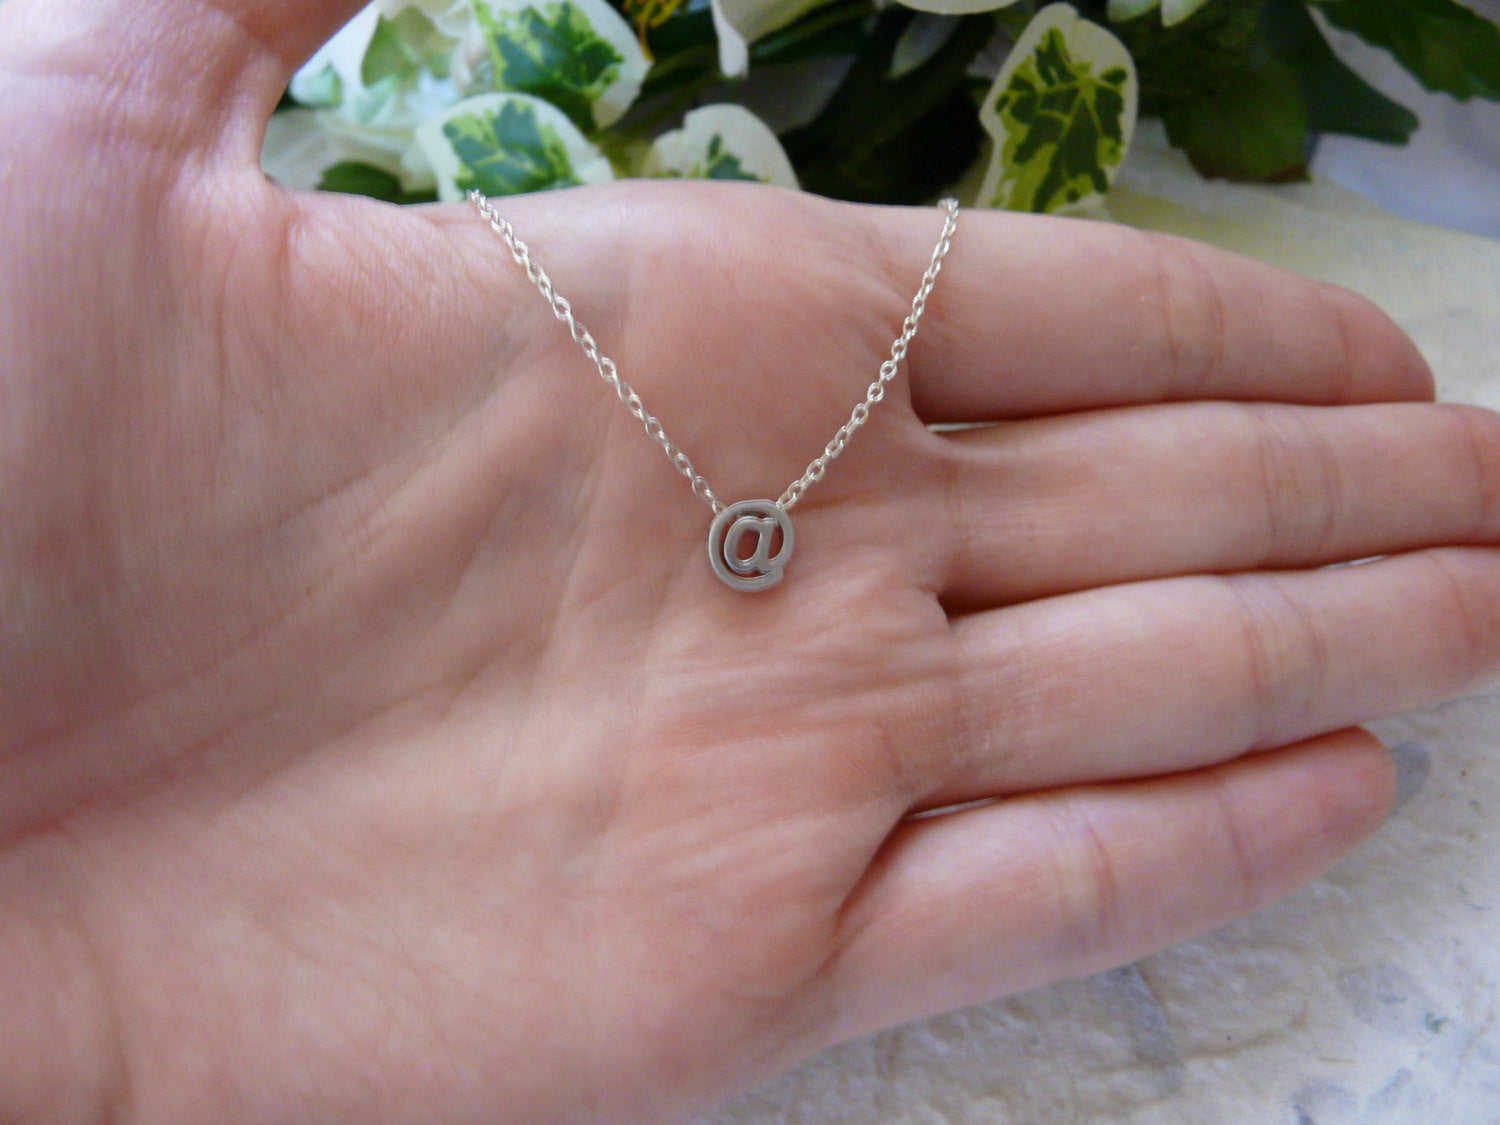 E-mail at sign @ necklace - OpaLandJewelry